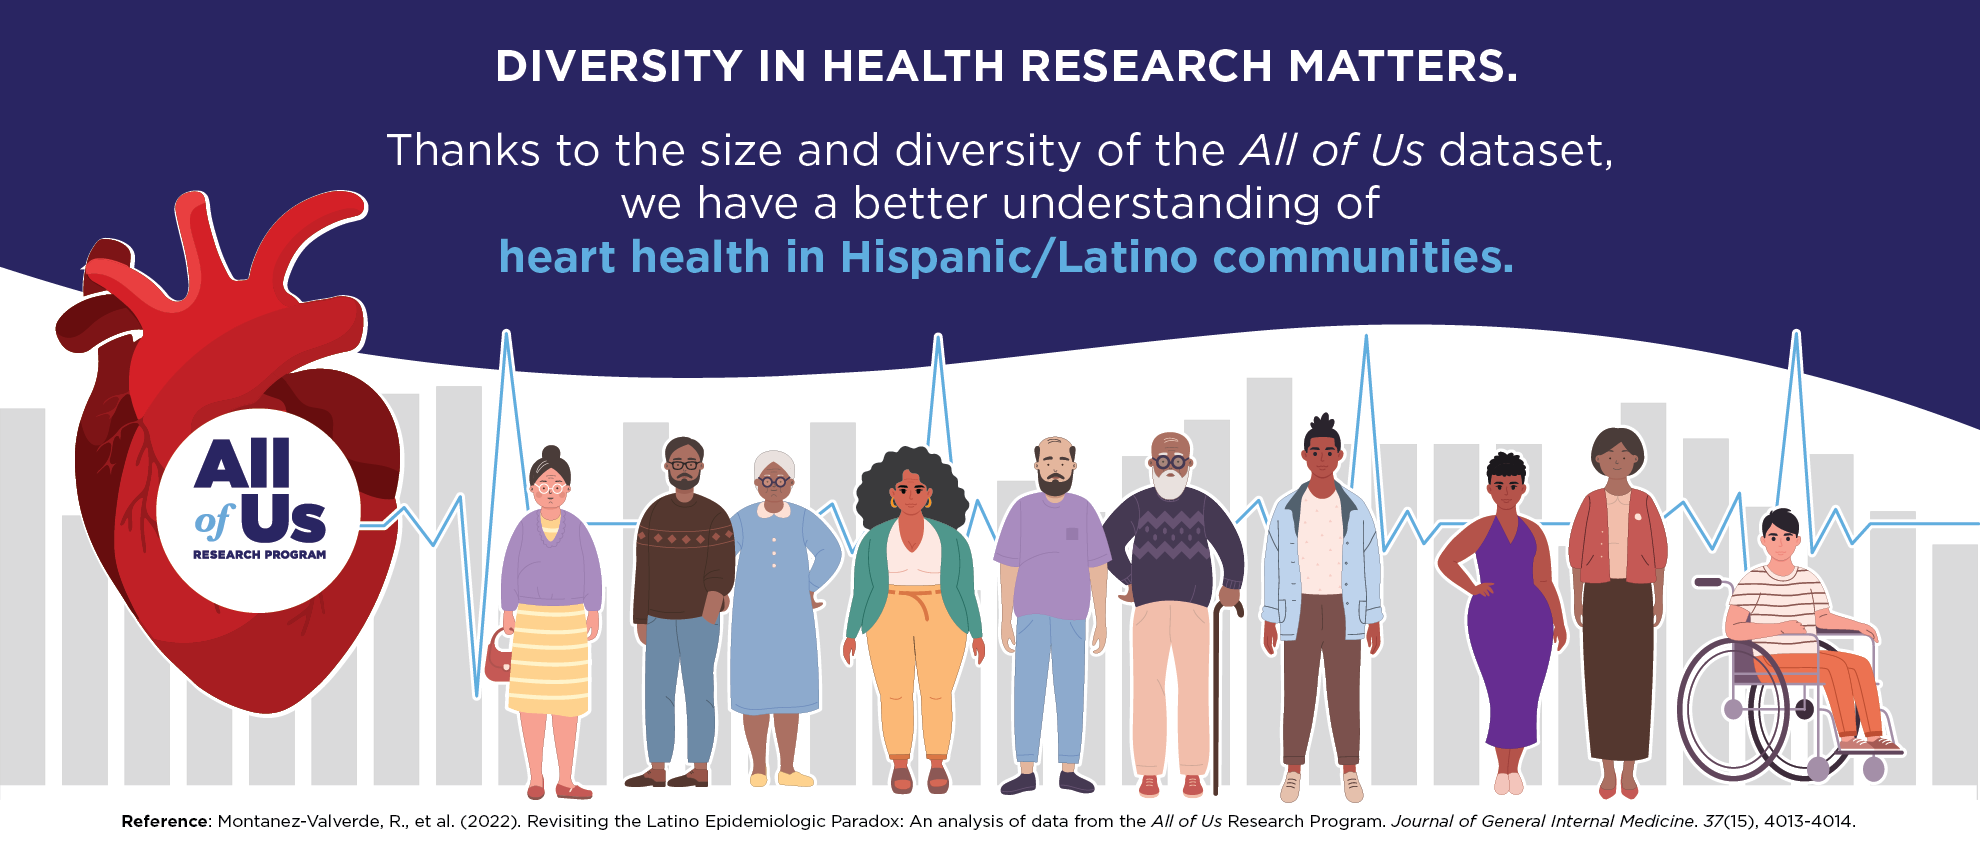 Logo of the All of Us Research Program. Diversity in Health Research Matters. Thanks to the size and diversity of the All of Us dataset, we have a better understanding of heart health in Hispanic/Latino communities. Reference: Montanez-Valverde, R., et al. (2022). Revisiting the Latino Epidemiologic Paradox: An analysis of data from the All of Us Research Program. Journal of General Internal Medicine. 37(15), 4013-4014.